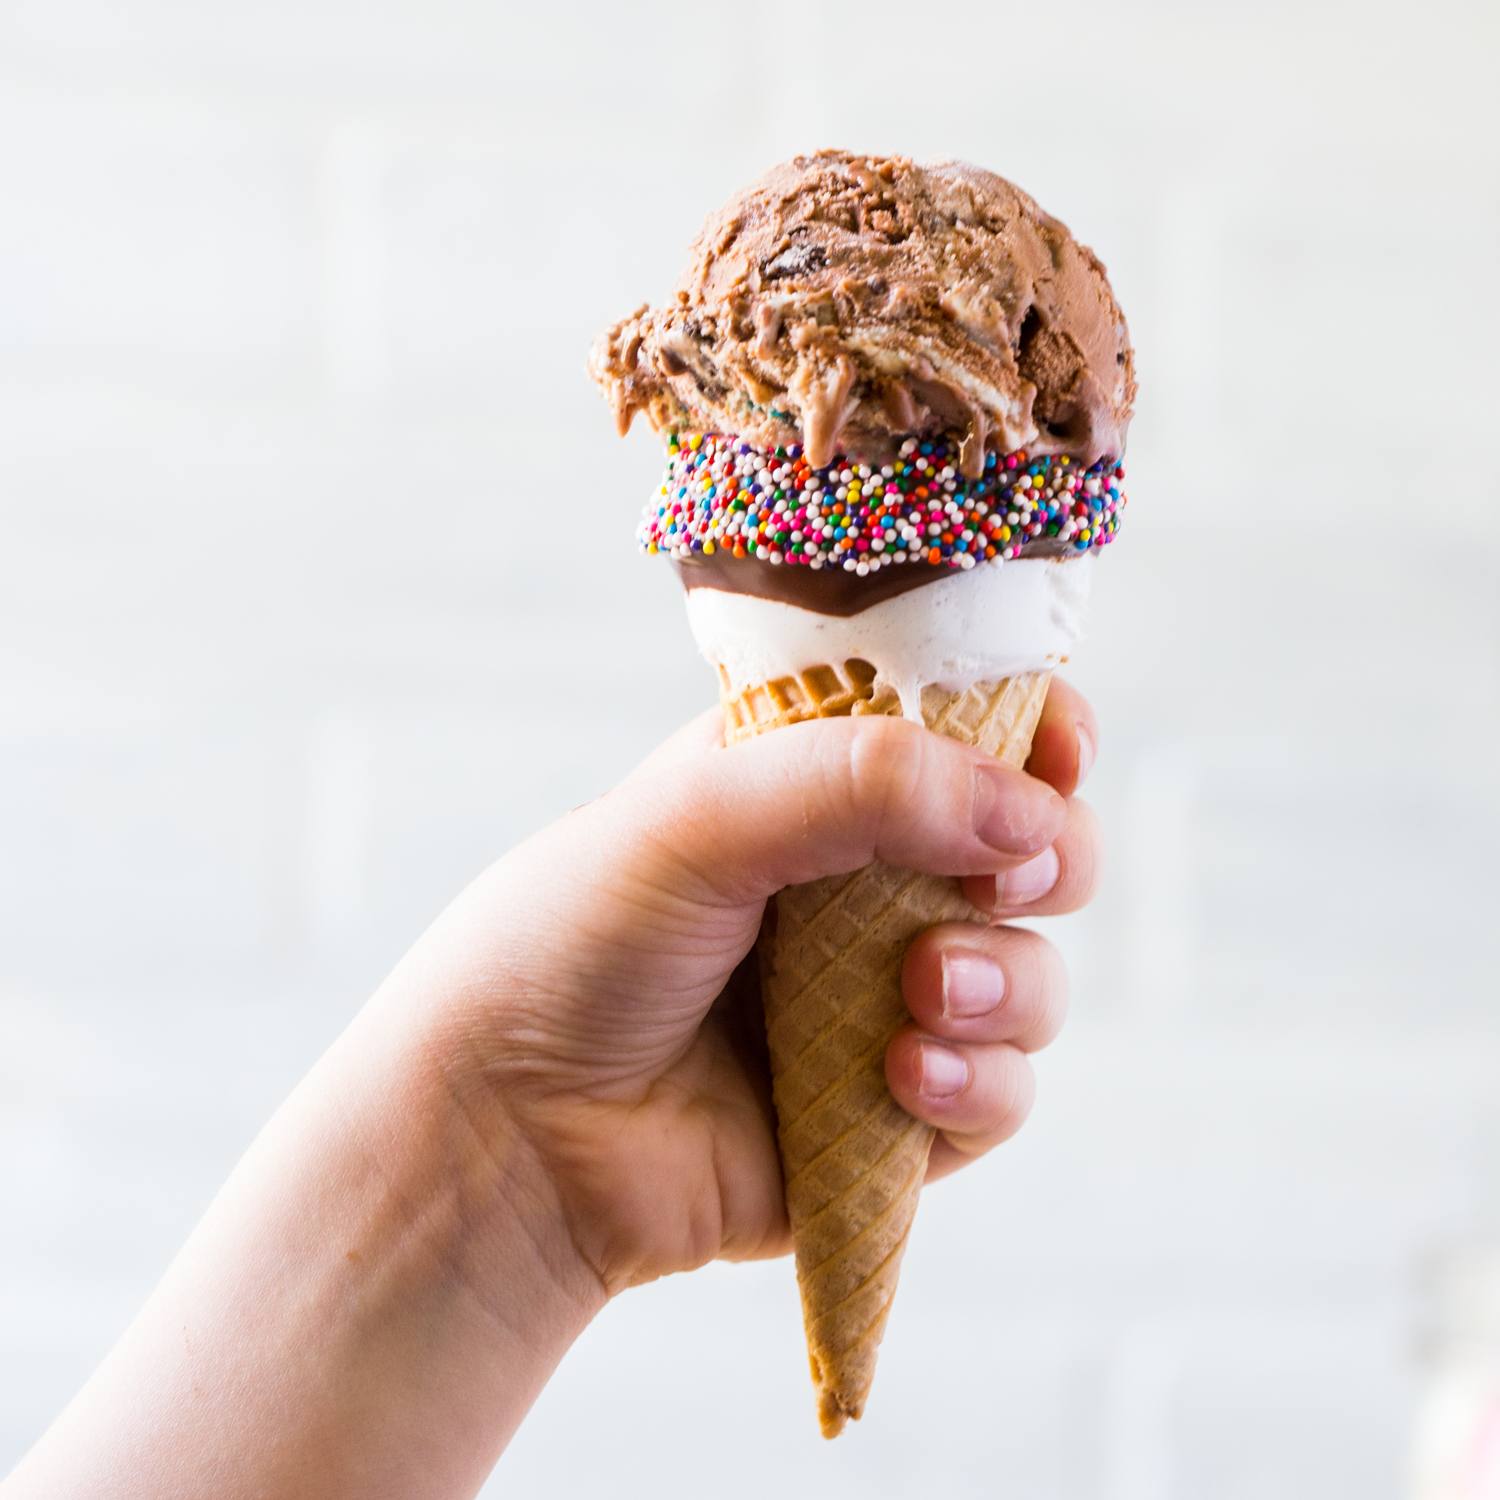 Marshmallow Dipped Ice Cream Cones for president!